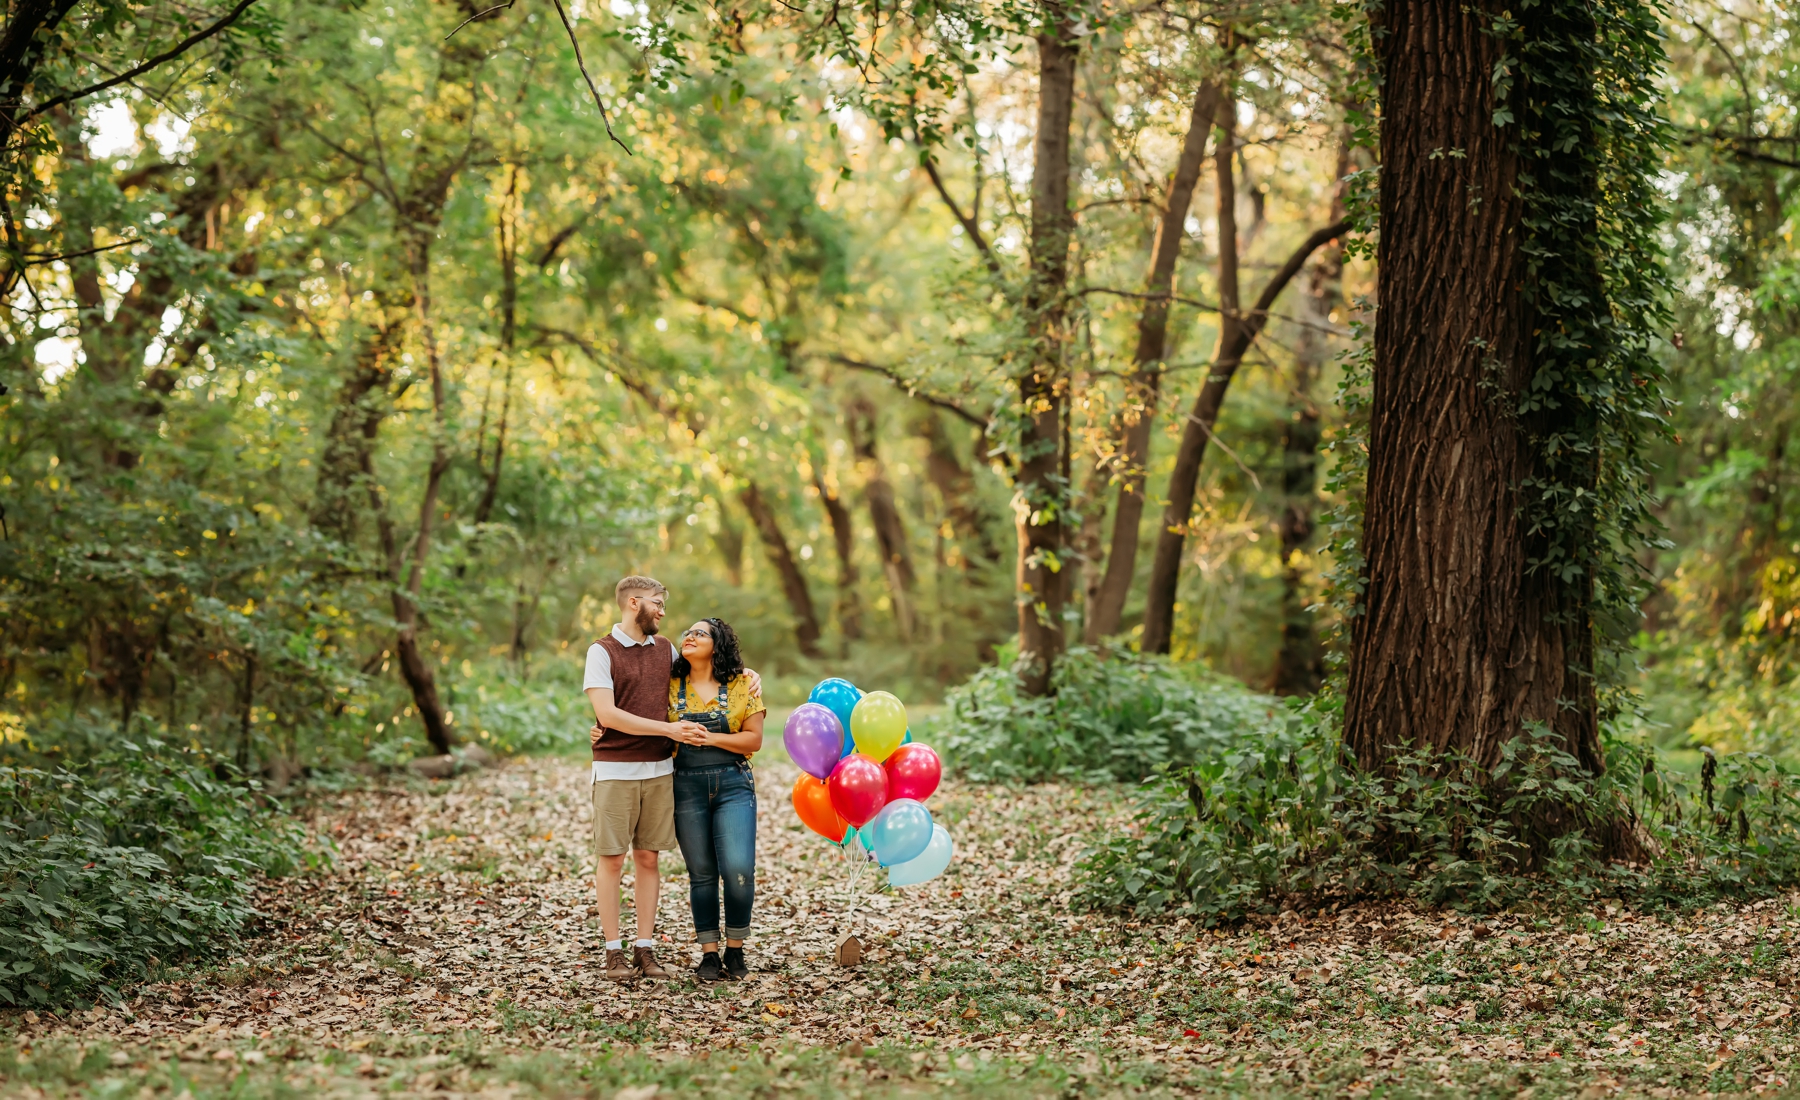 Georgie and Jason disney pixar up themed session balloons brittany jewell phtoography engagement session carl and ellie